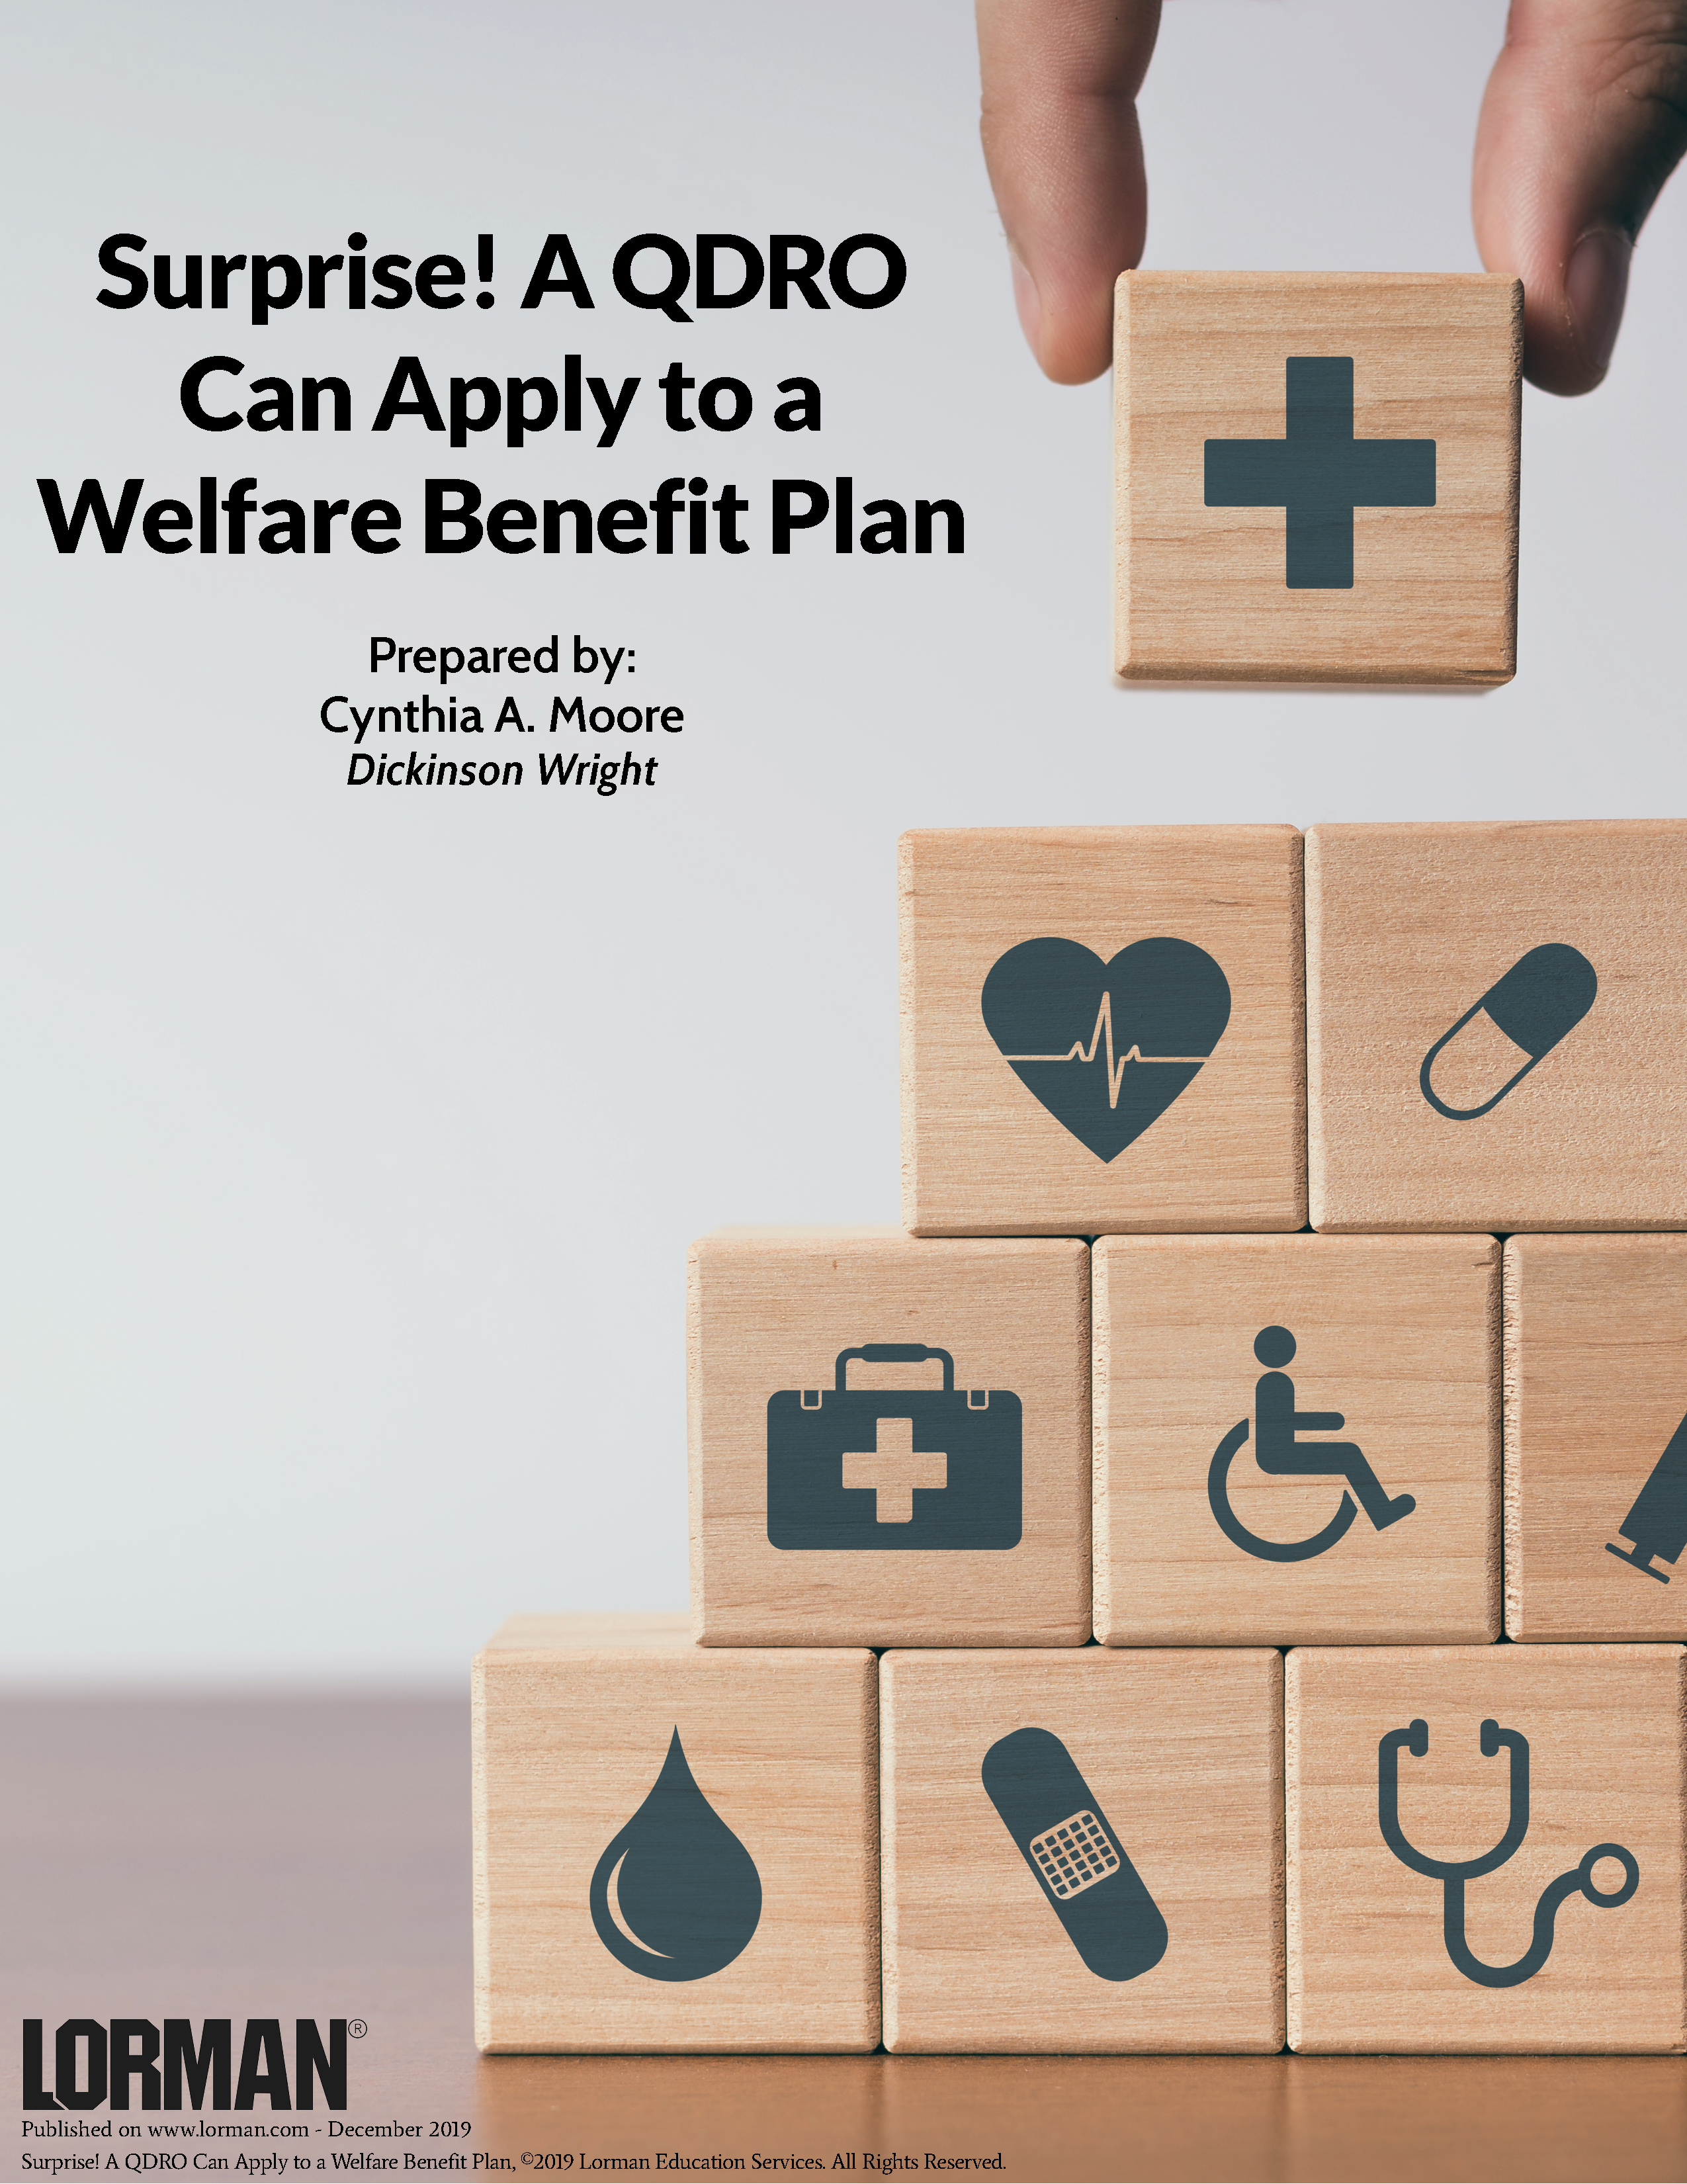 Surprise! A QDRO Can Apply to a Welfare Benefit Plan